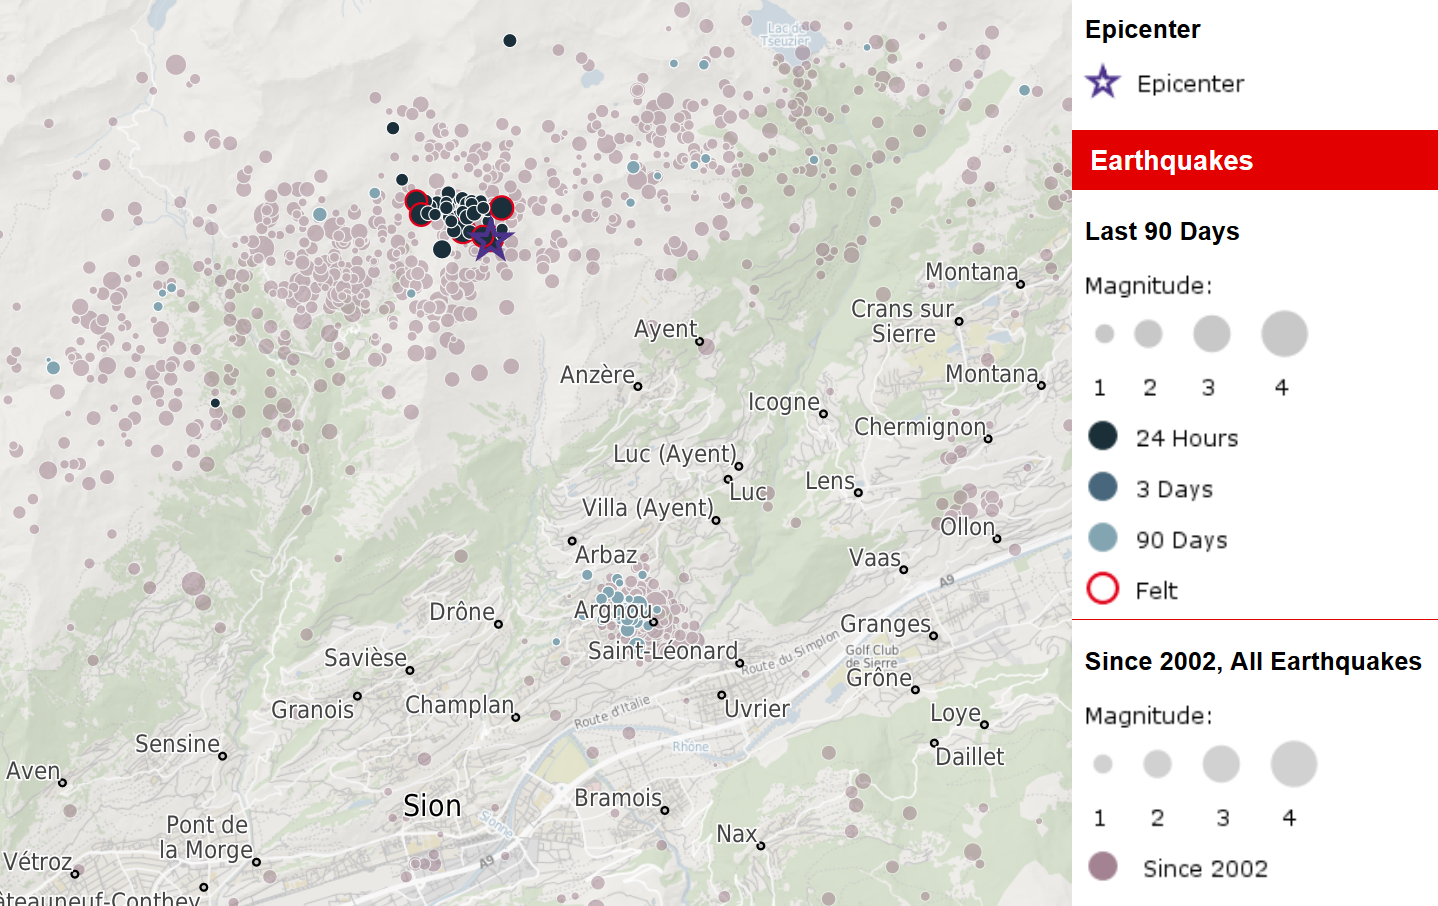 Ongoing earthquake swarm north of Sion (VS)